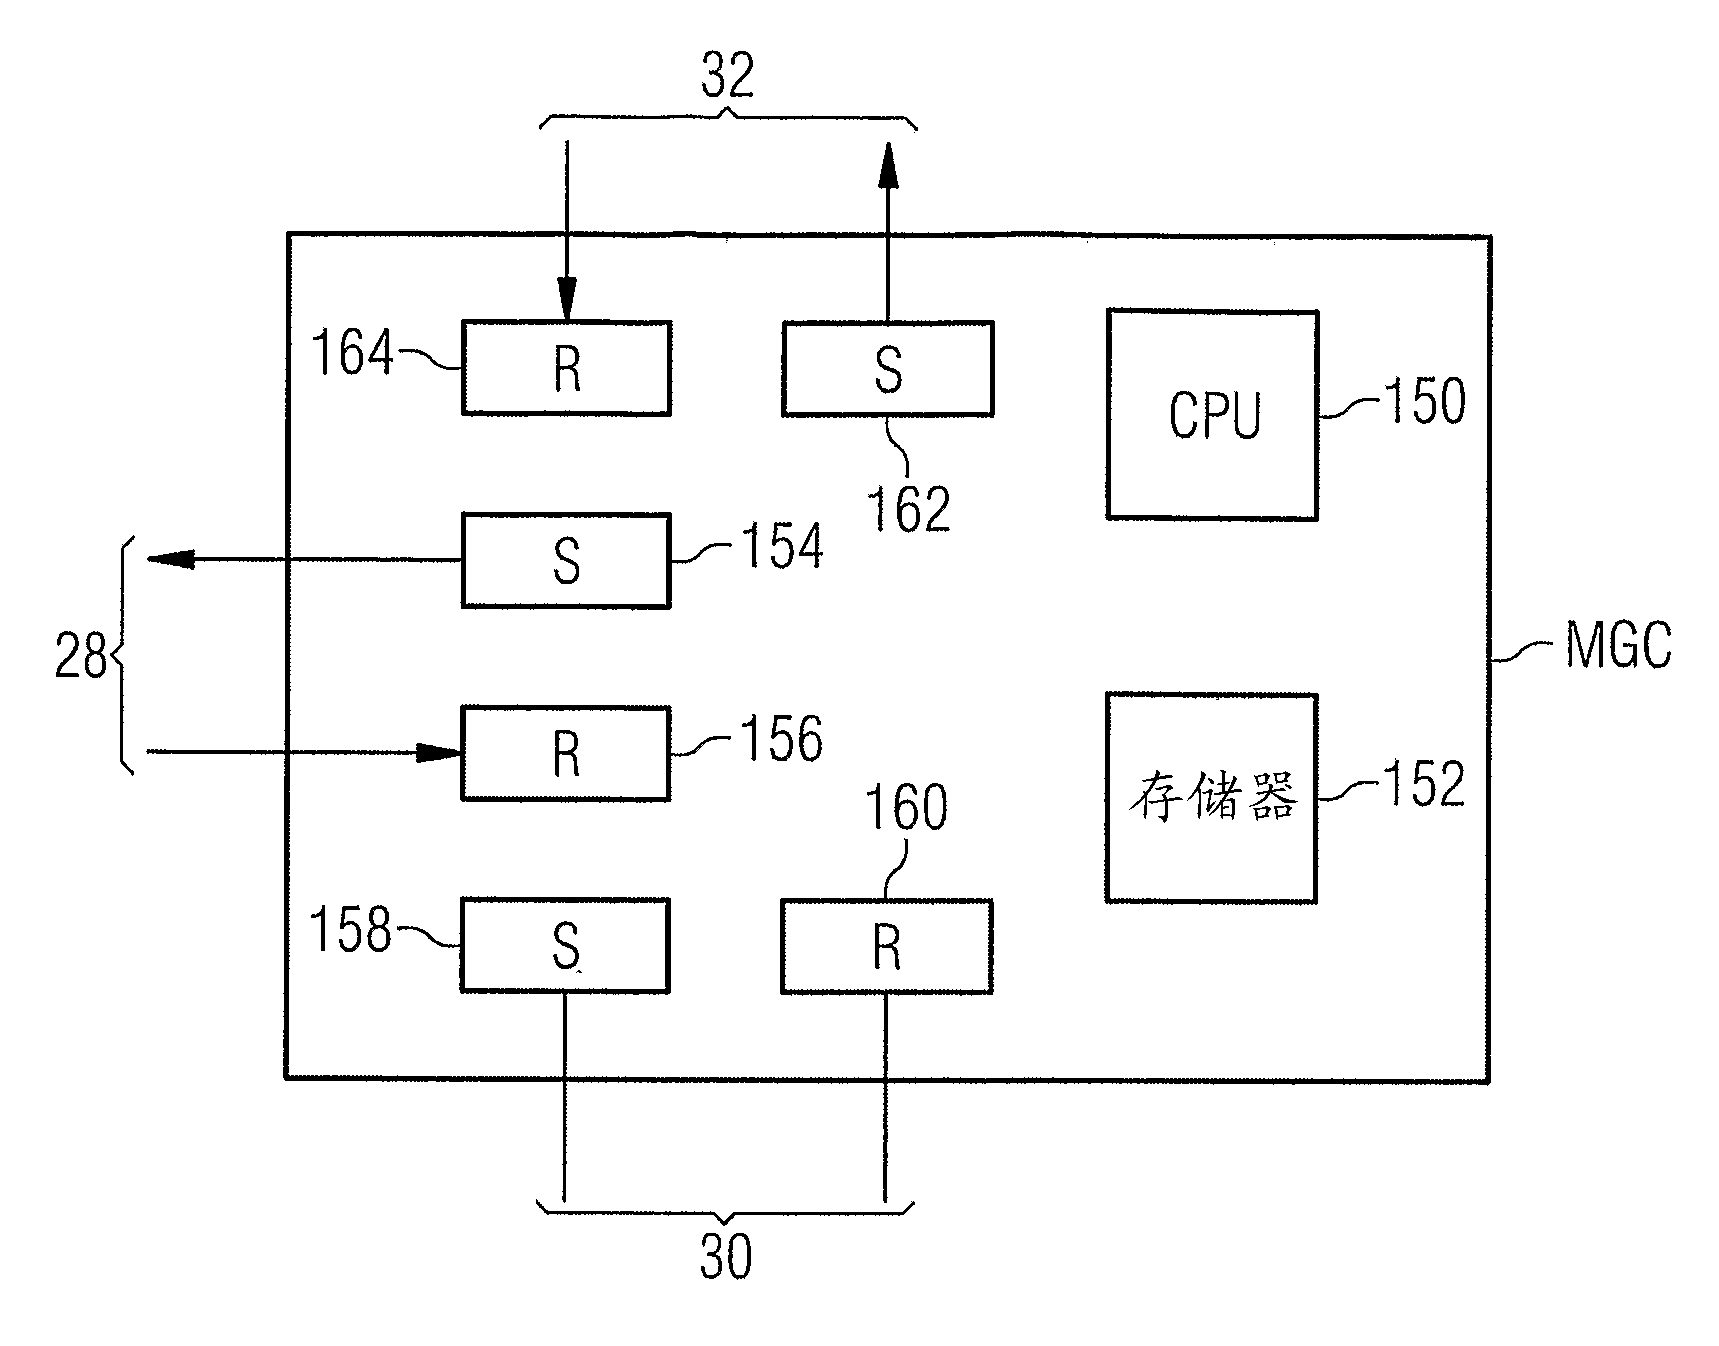 Method for transmitting a caller number, messages, gateway device and gateway control device